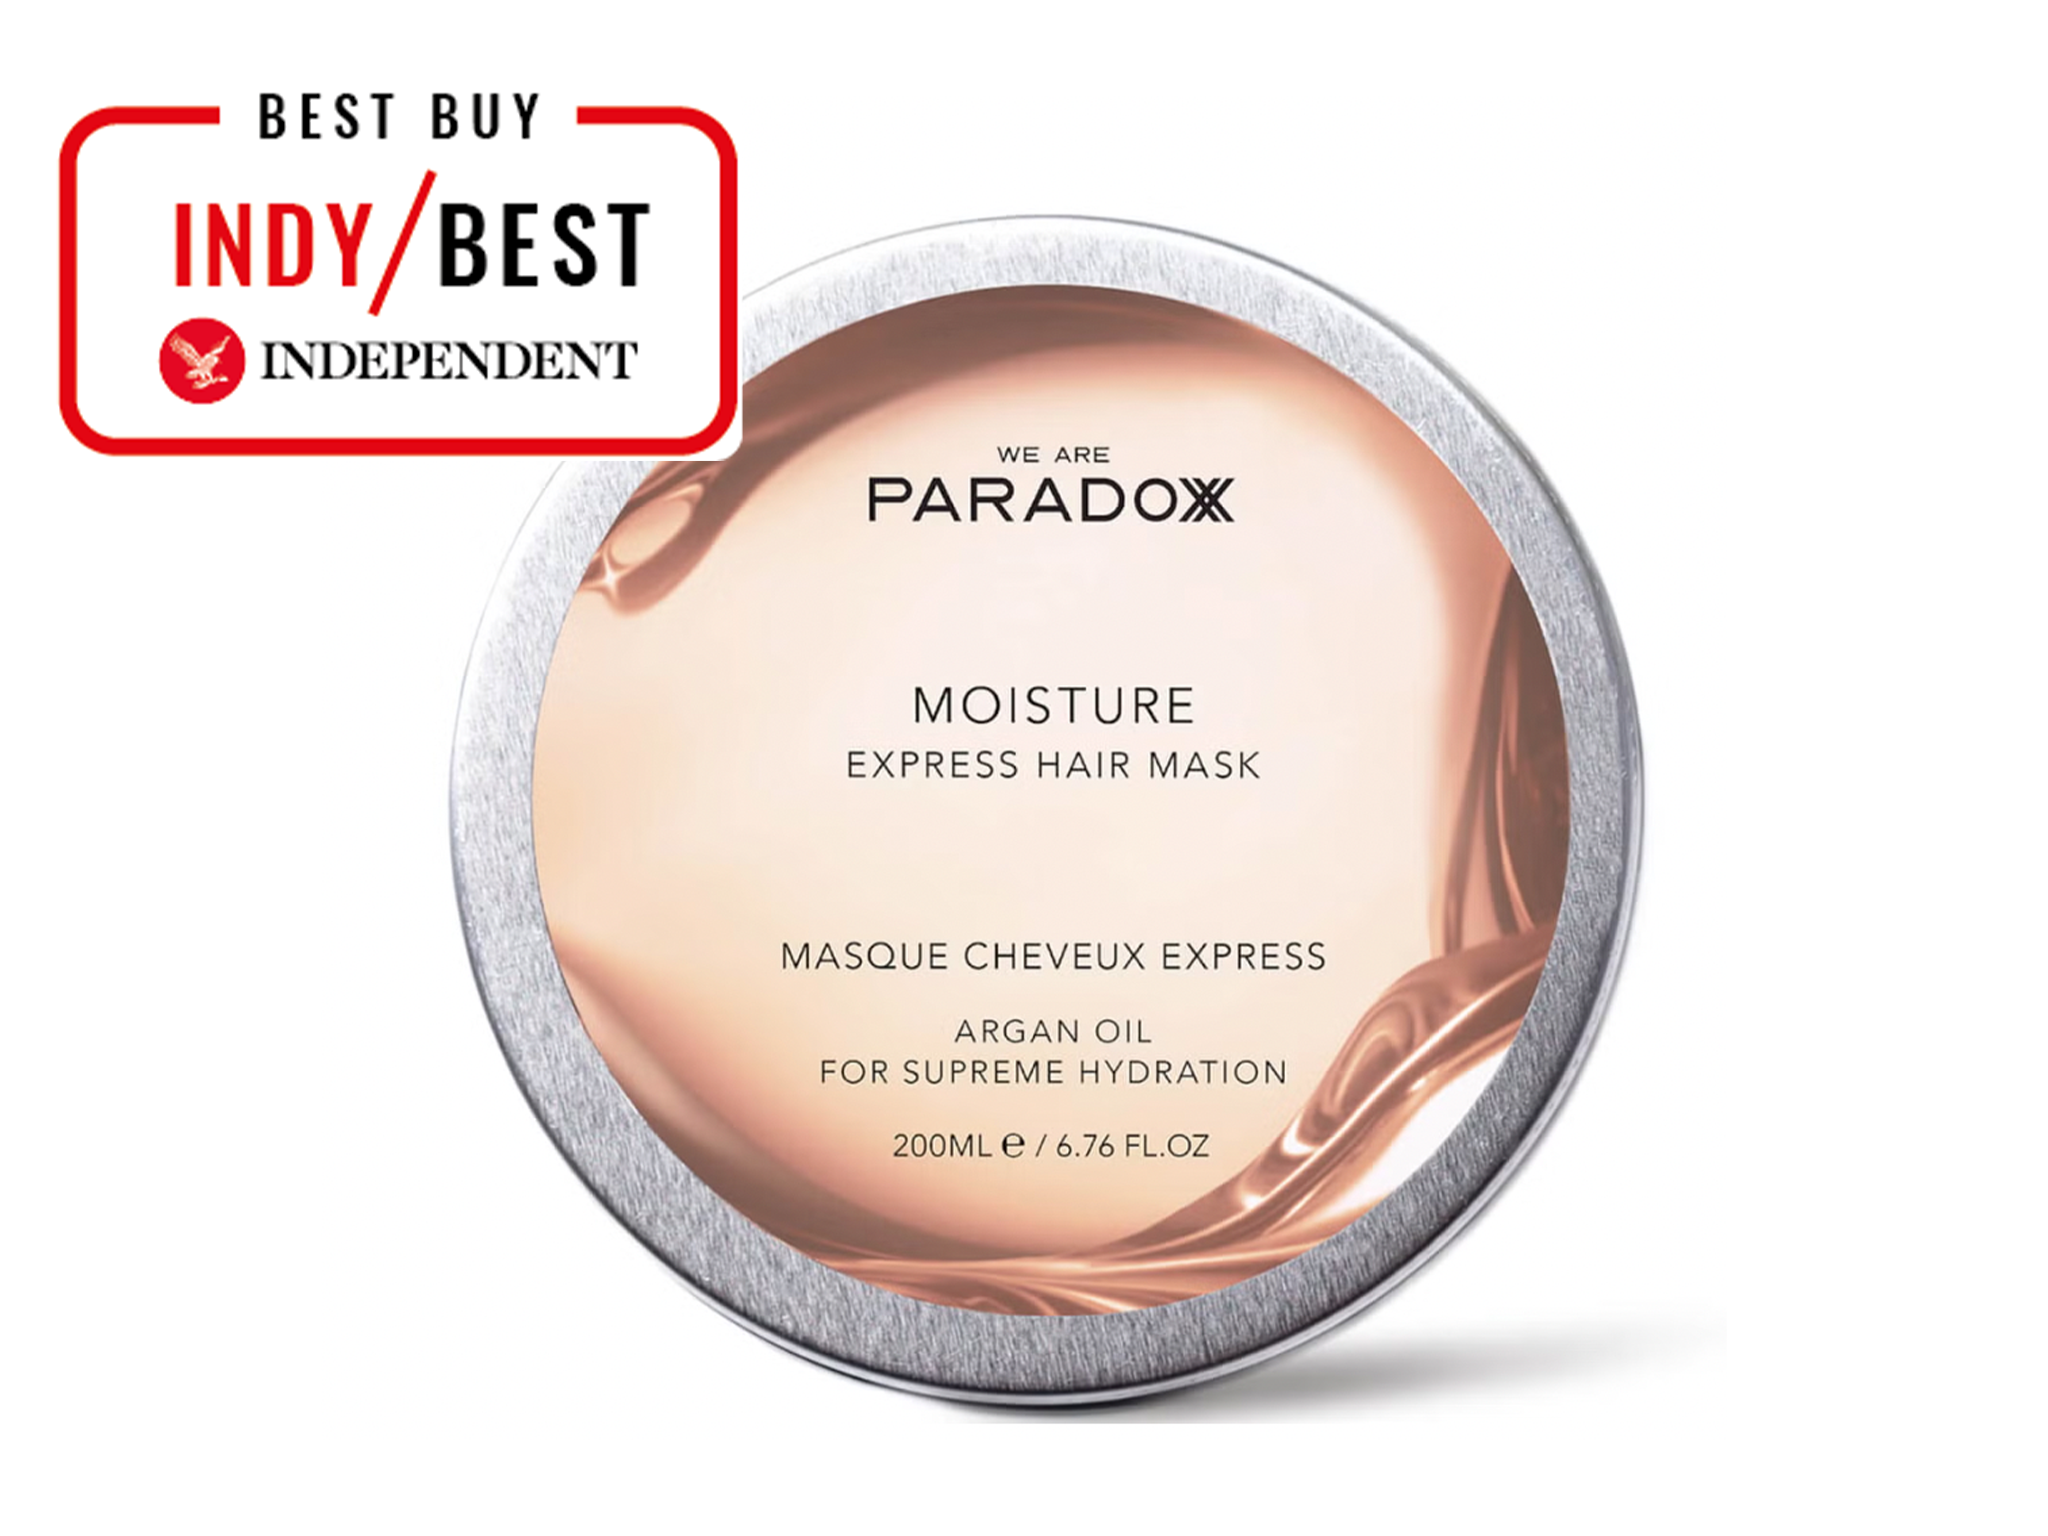 We Are Paradoxx moisture express hair mask